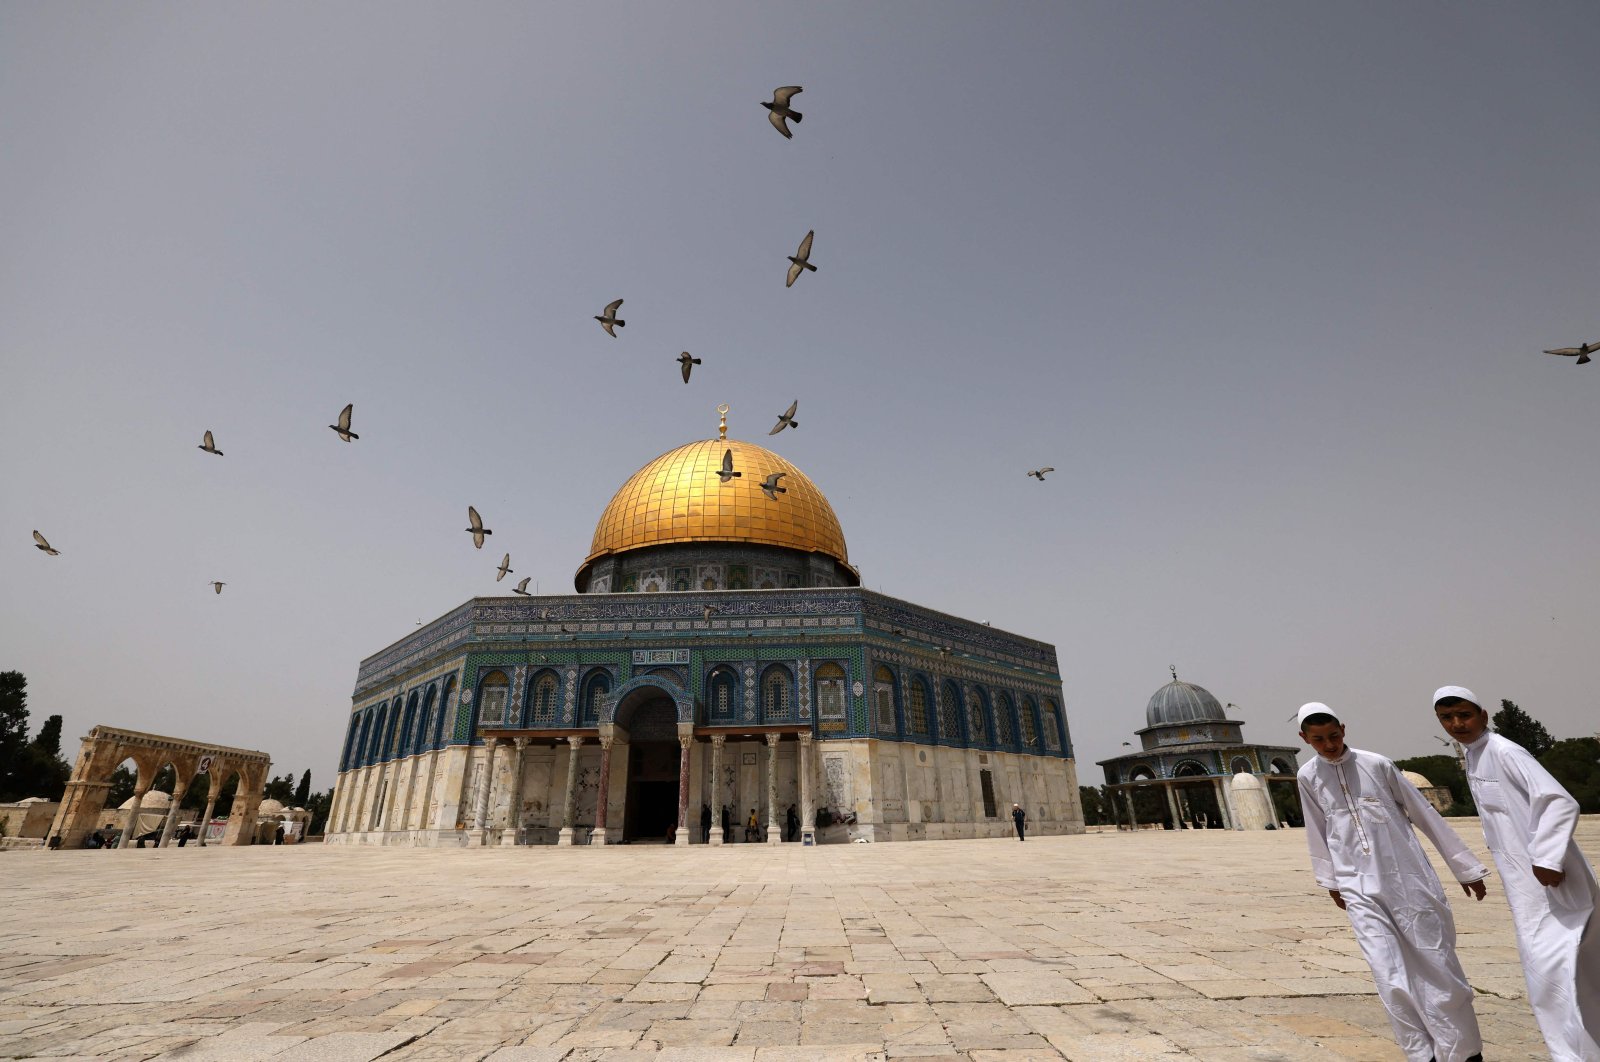 Palestinian Muslims walk in front of the Dome of Rock at the Al-Aqsa compound in Jerusalem&#039;s Old City, occupied Palestine, April 17, 2022. (AFP Photo)